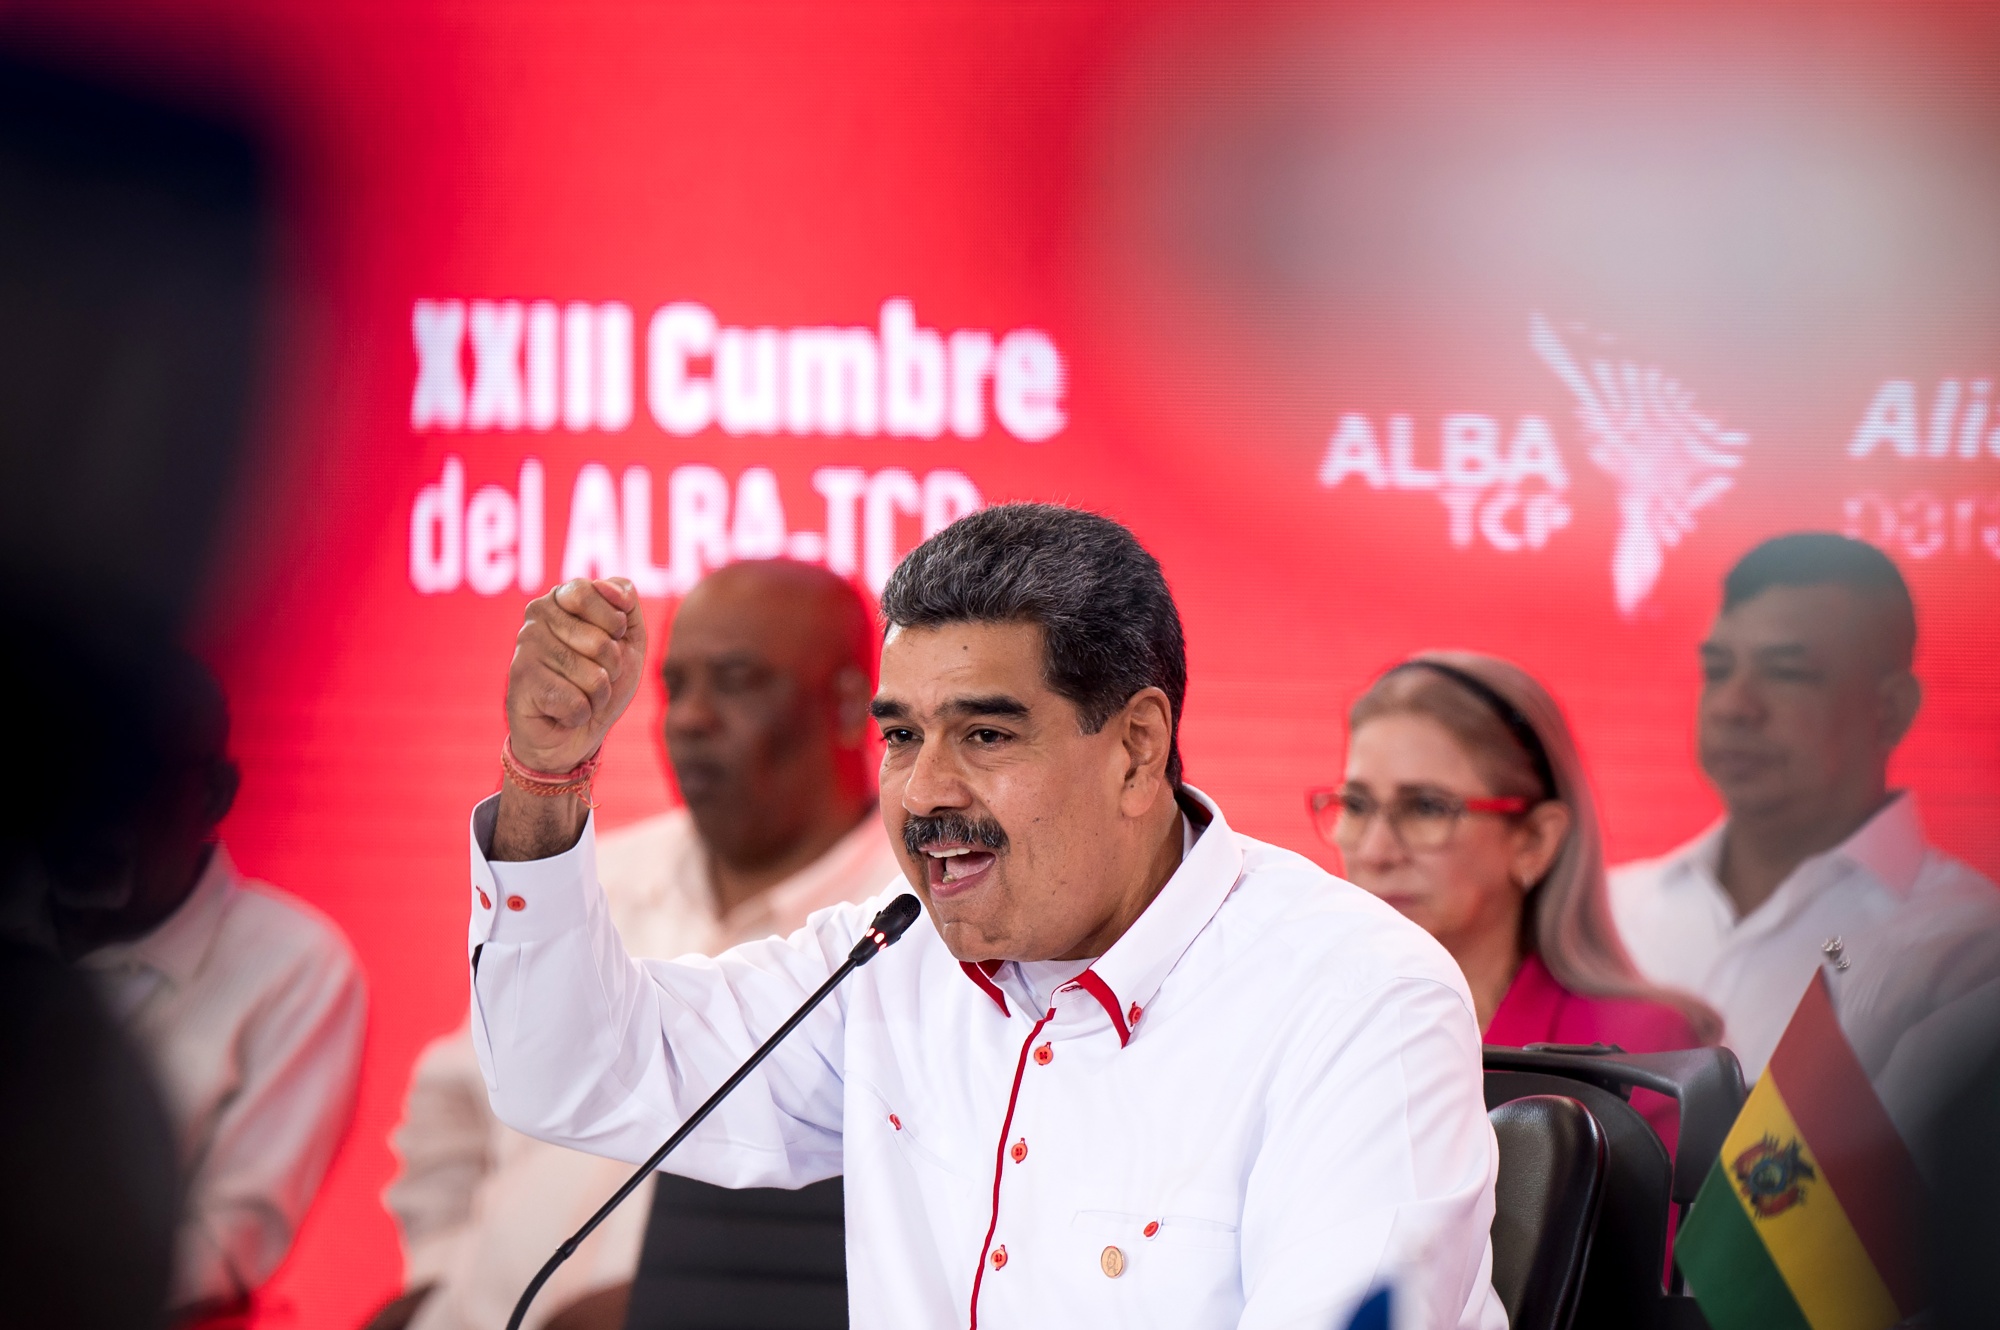 Nicolas Maduro, Venezuela's president, during the 23rd States of the Bolivarian Alliance for the Peoples of Our America - People's Trade Treaty (ALBA-TCP) Summit at Miraflores Palace in Caracas, Venezuela, on Wednesday, April 24, 2024.&nbsp;